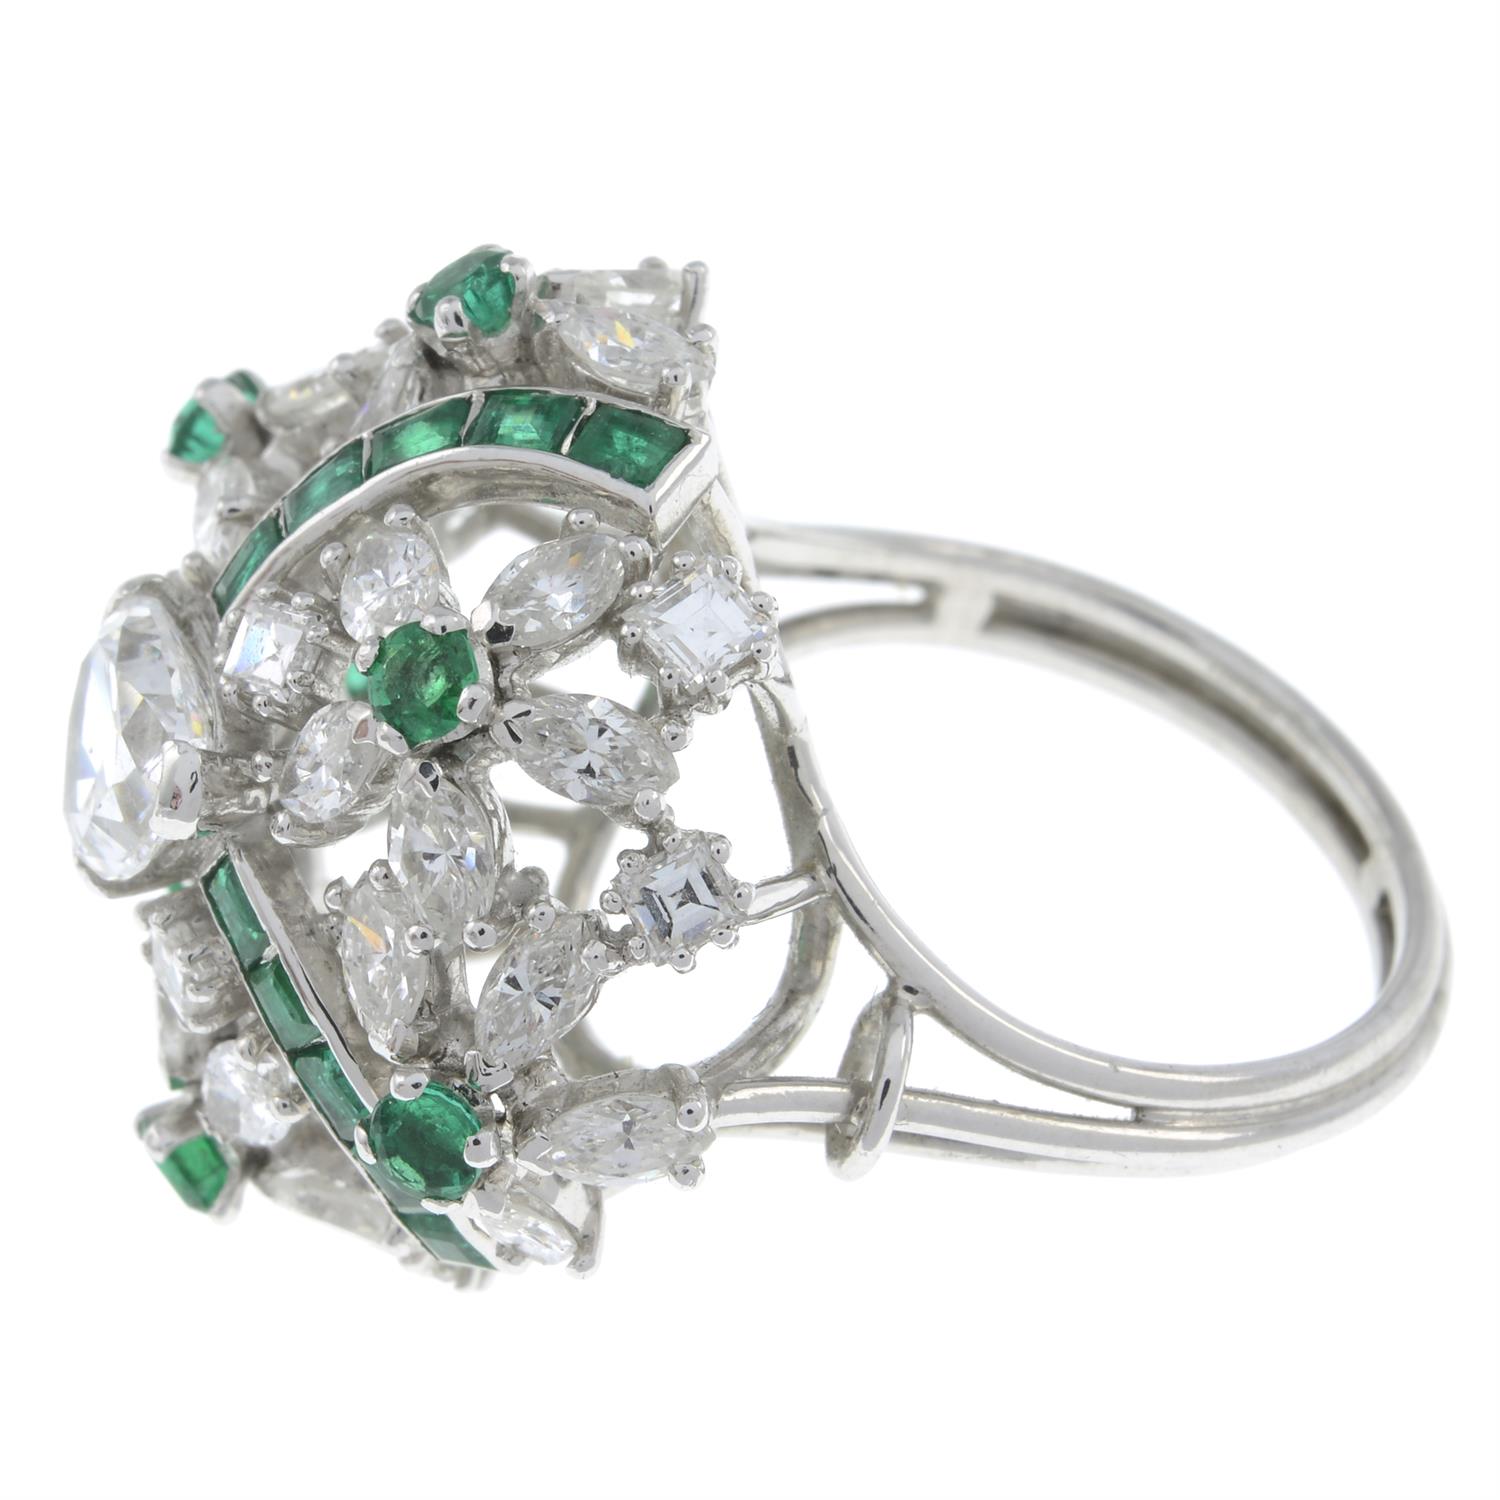 Mid 20th century platinum diamond and emerald floral ring - Image 4 of 6